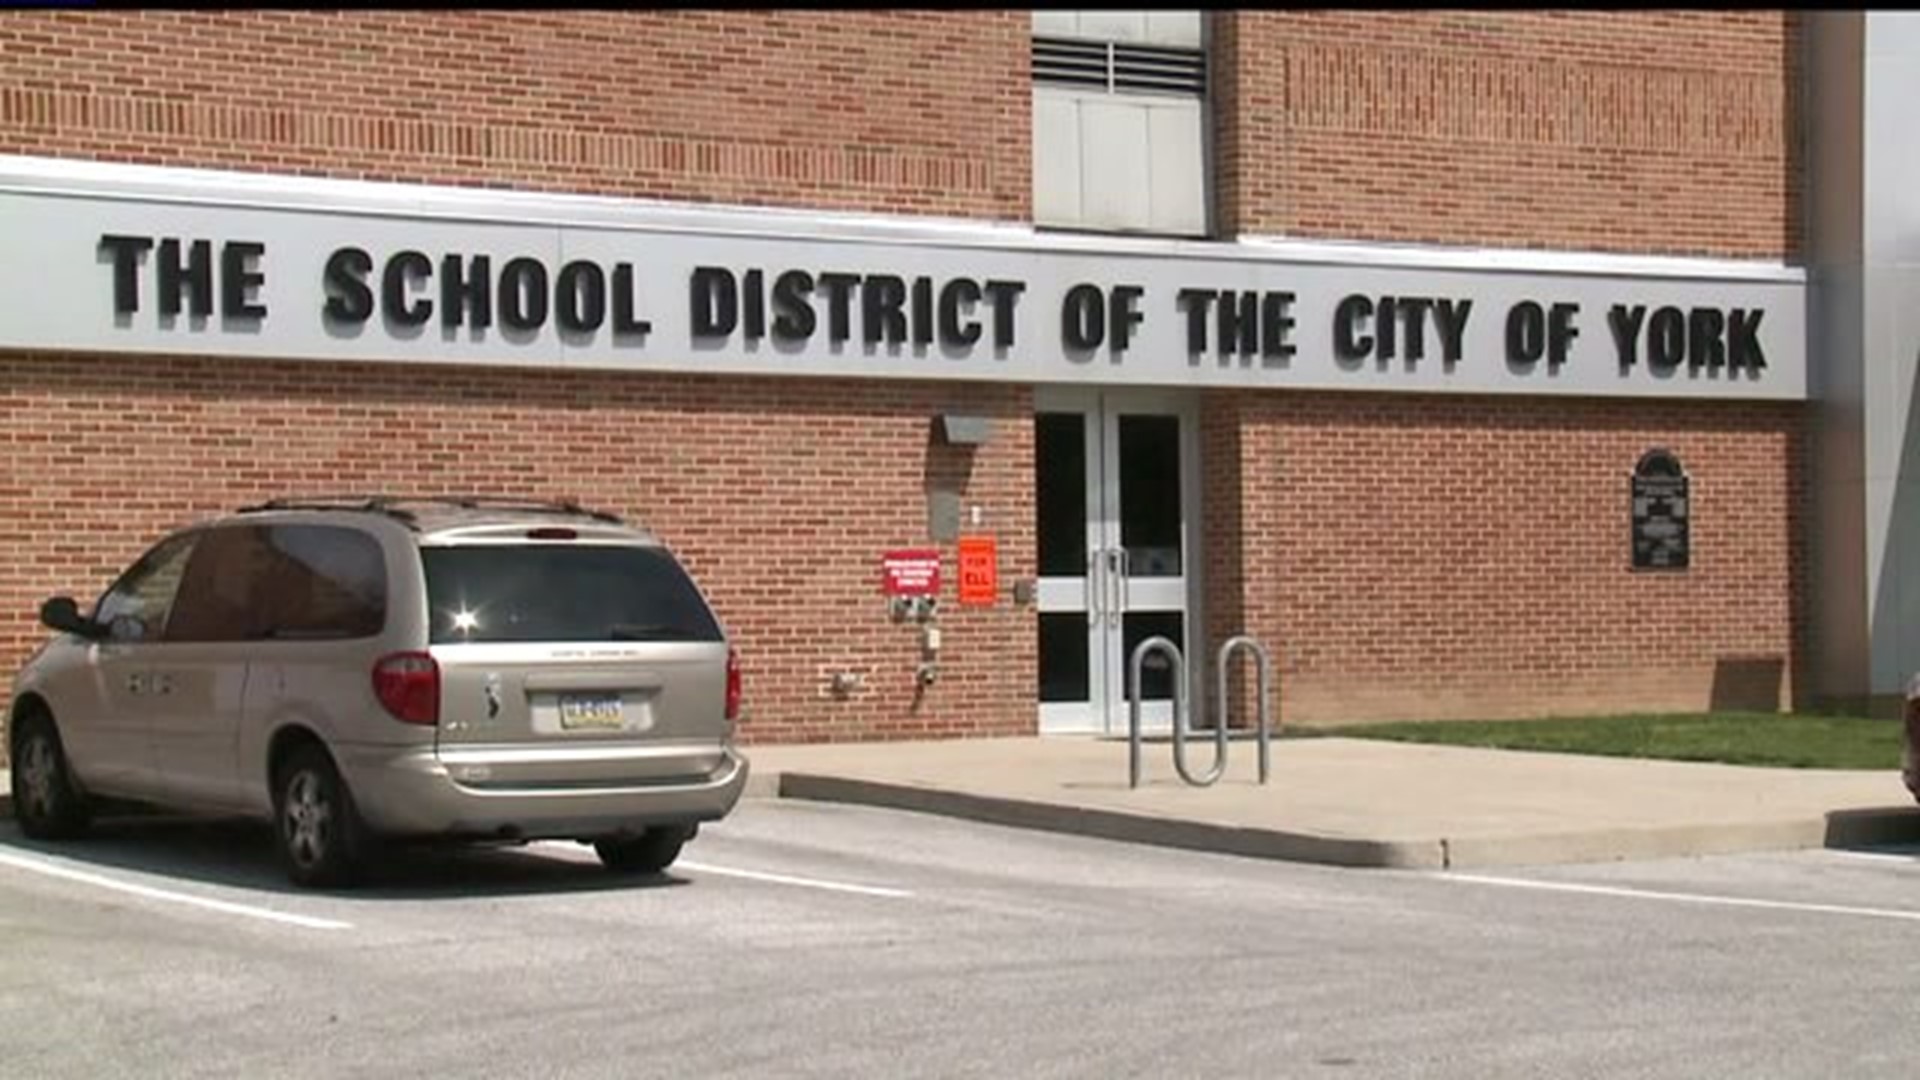 Audit to begin at York City School district